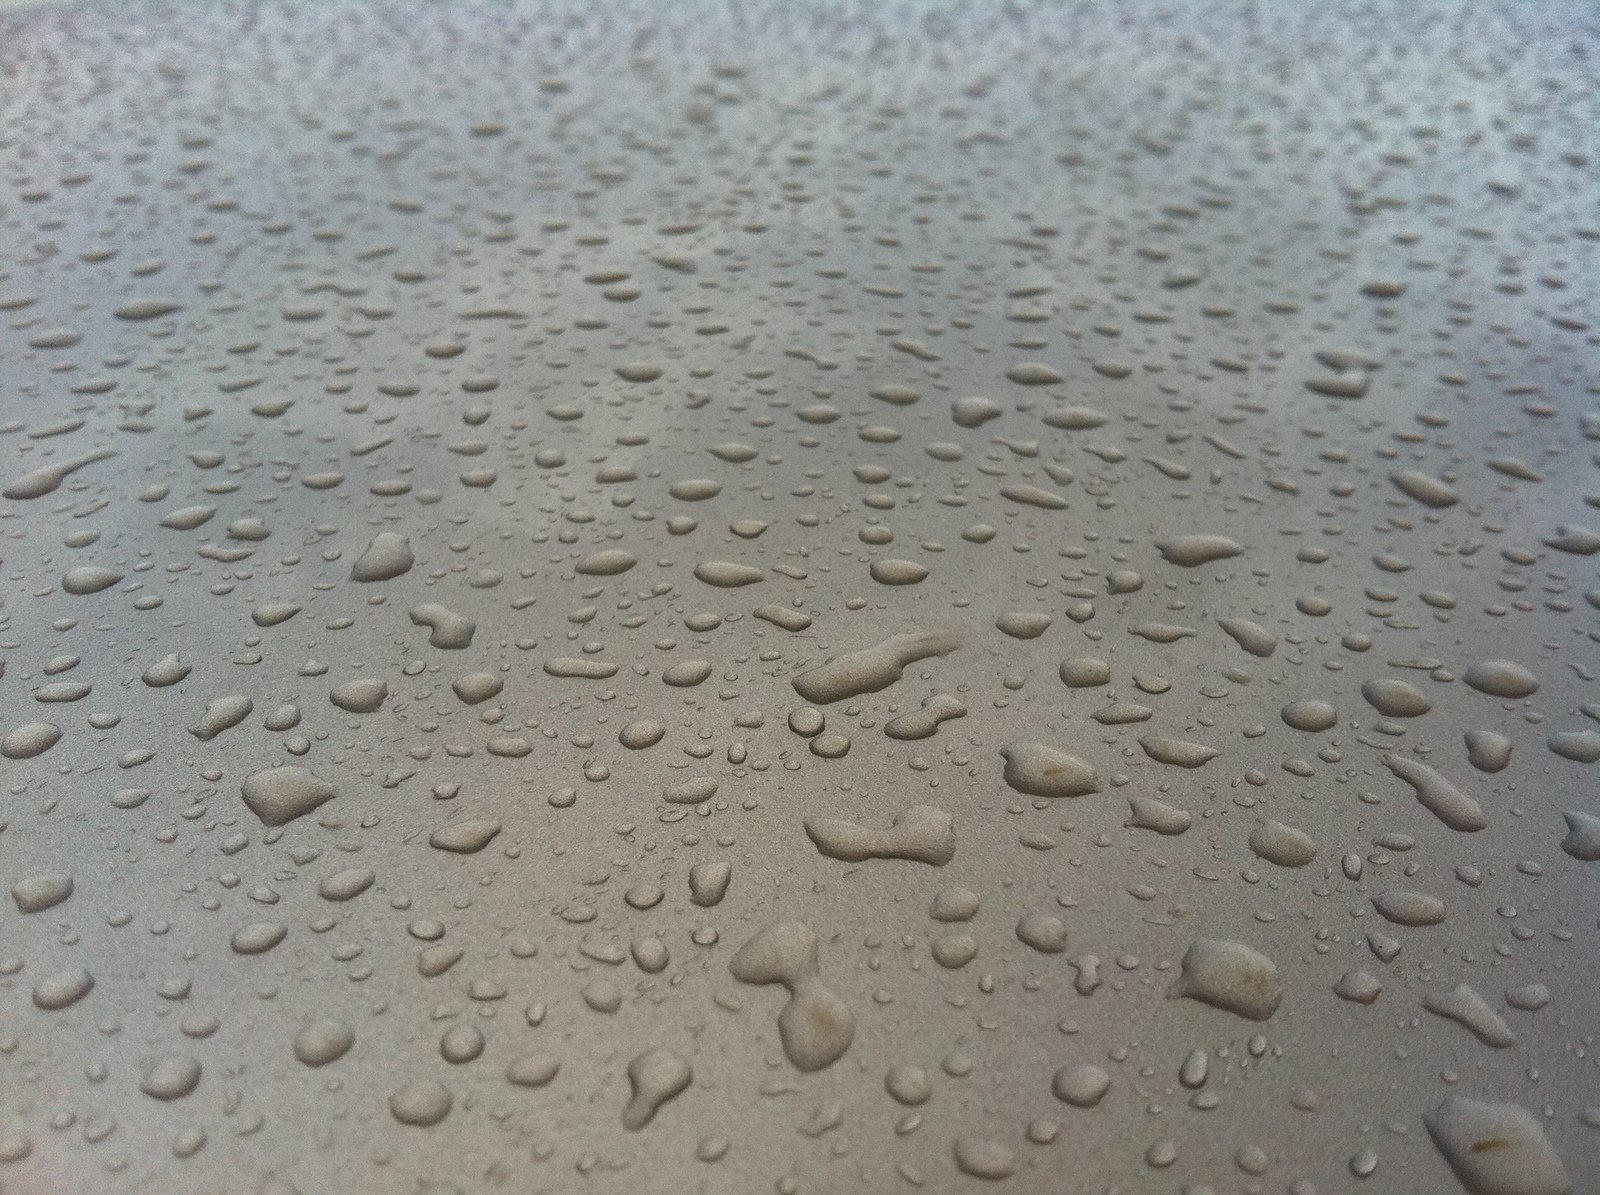 a bunch of drops on top of some sand